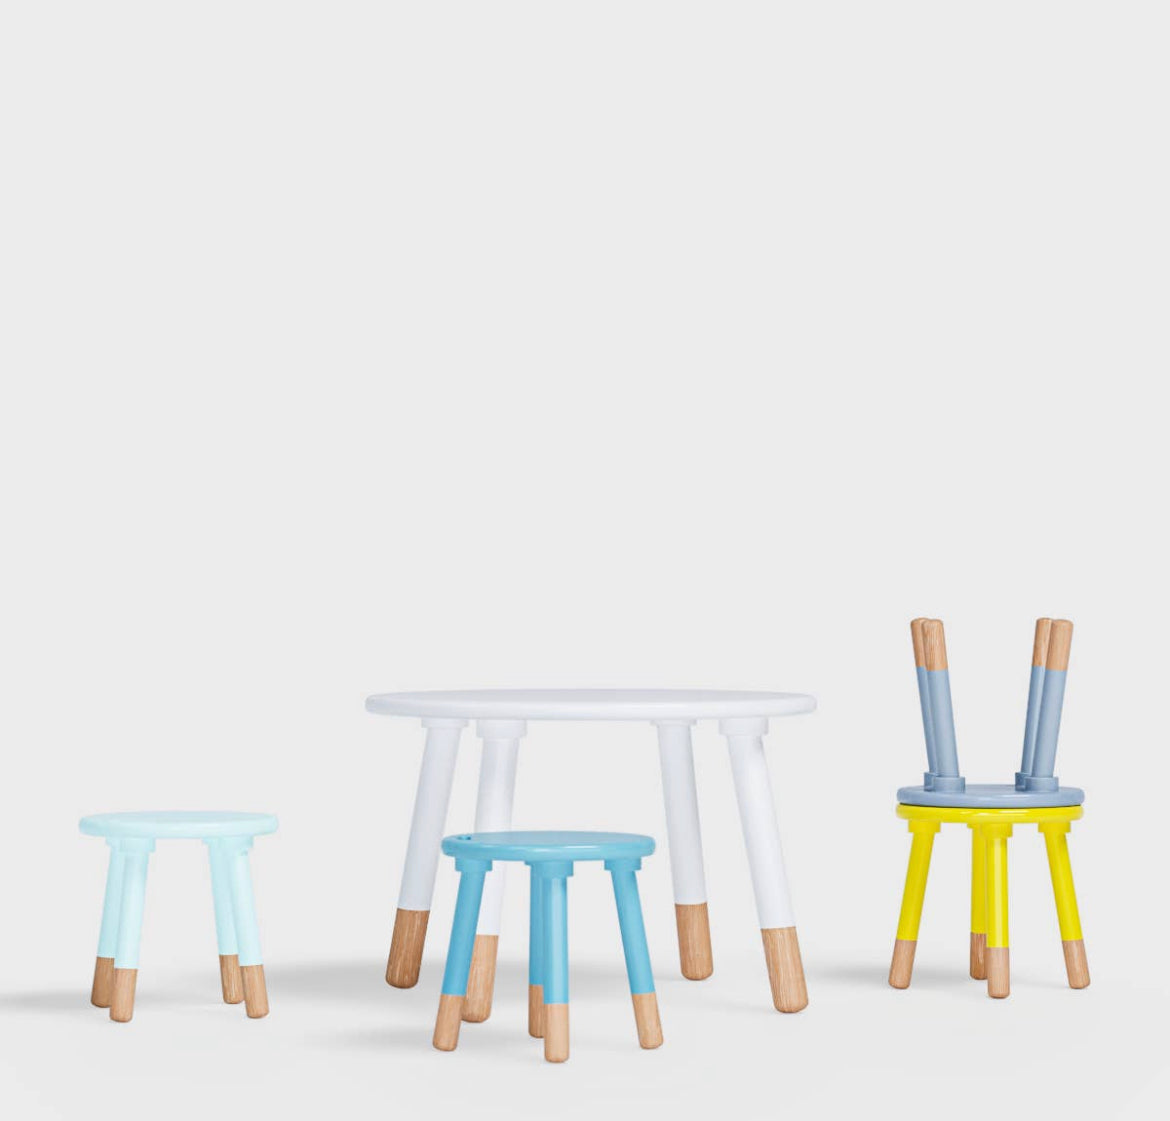 Activity table set- removable legs